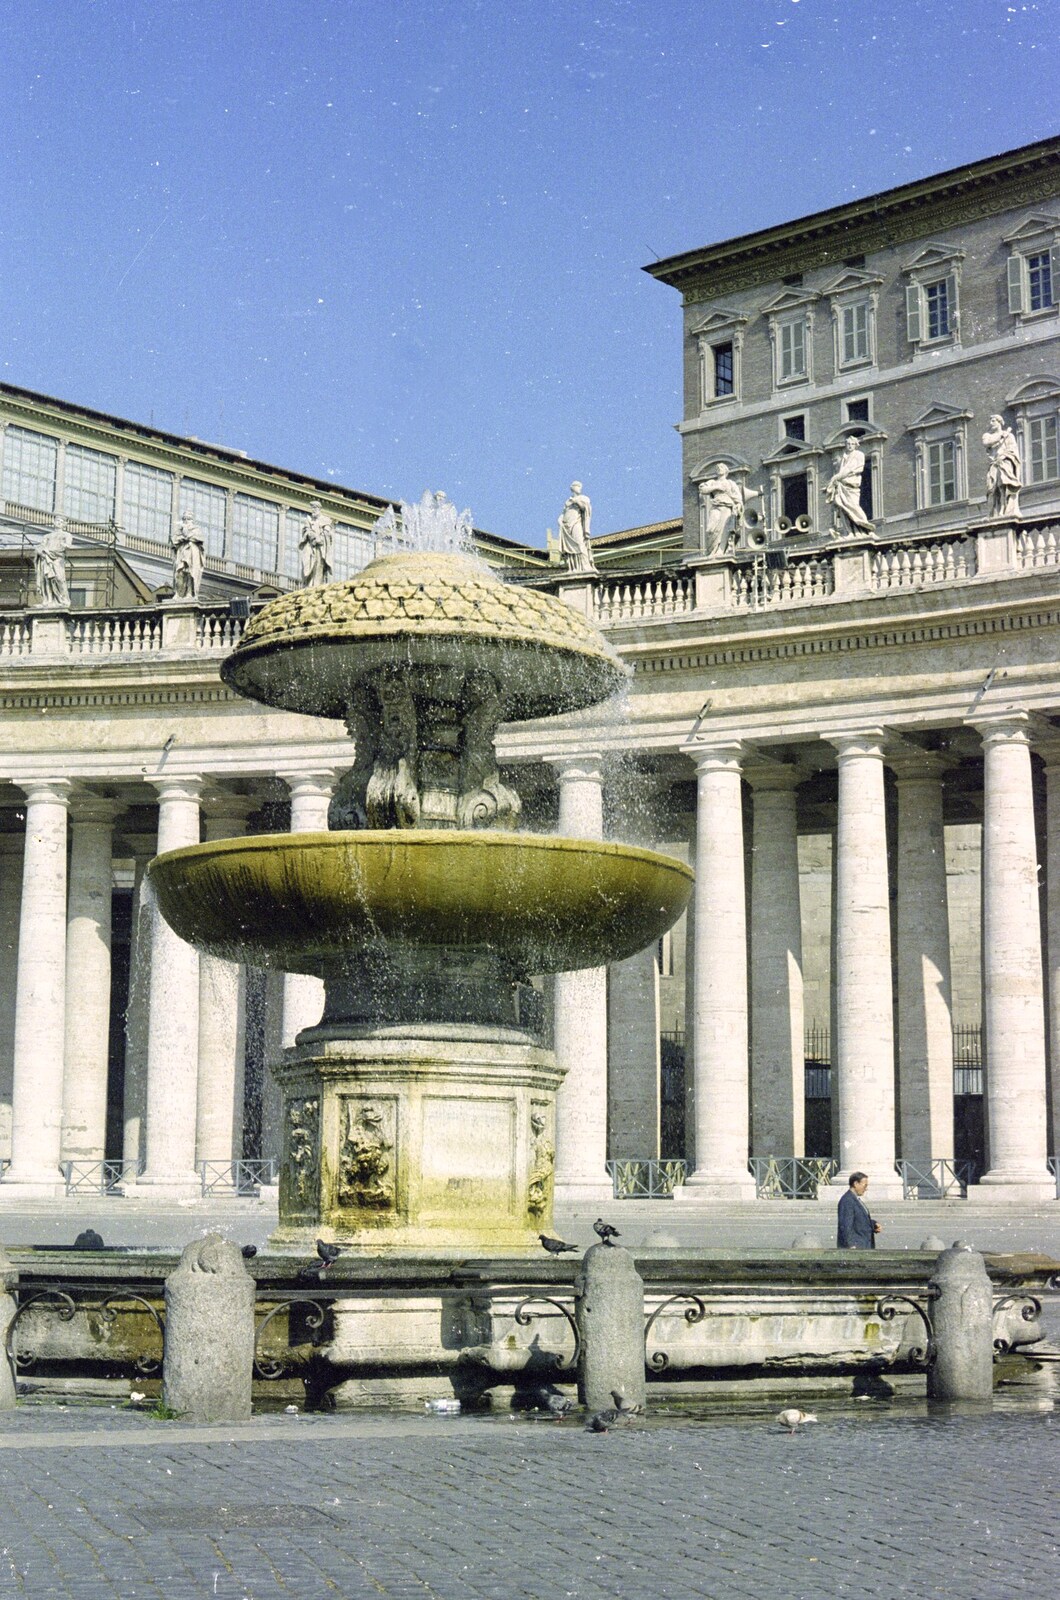 A fountain in St Peter's Square, Vatican from A Working Trip to Rome, Italy - 10th September 1999